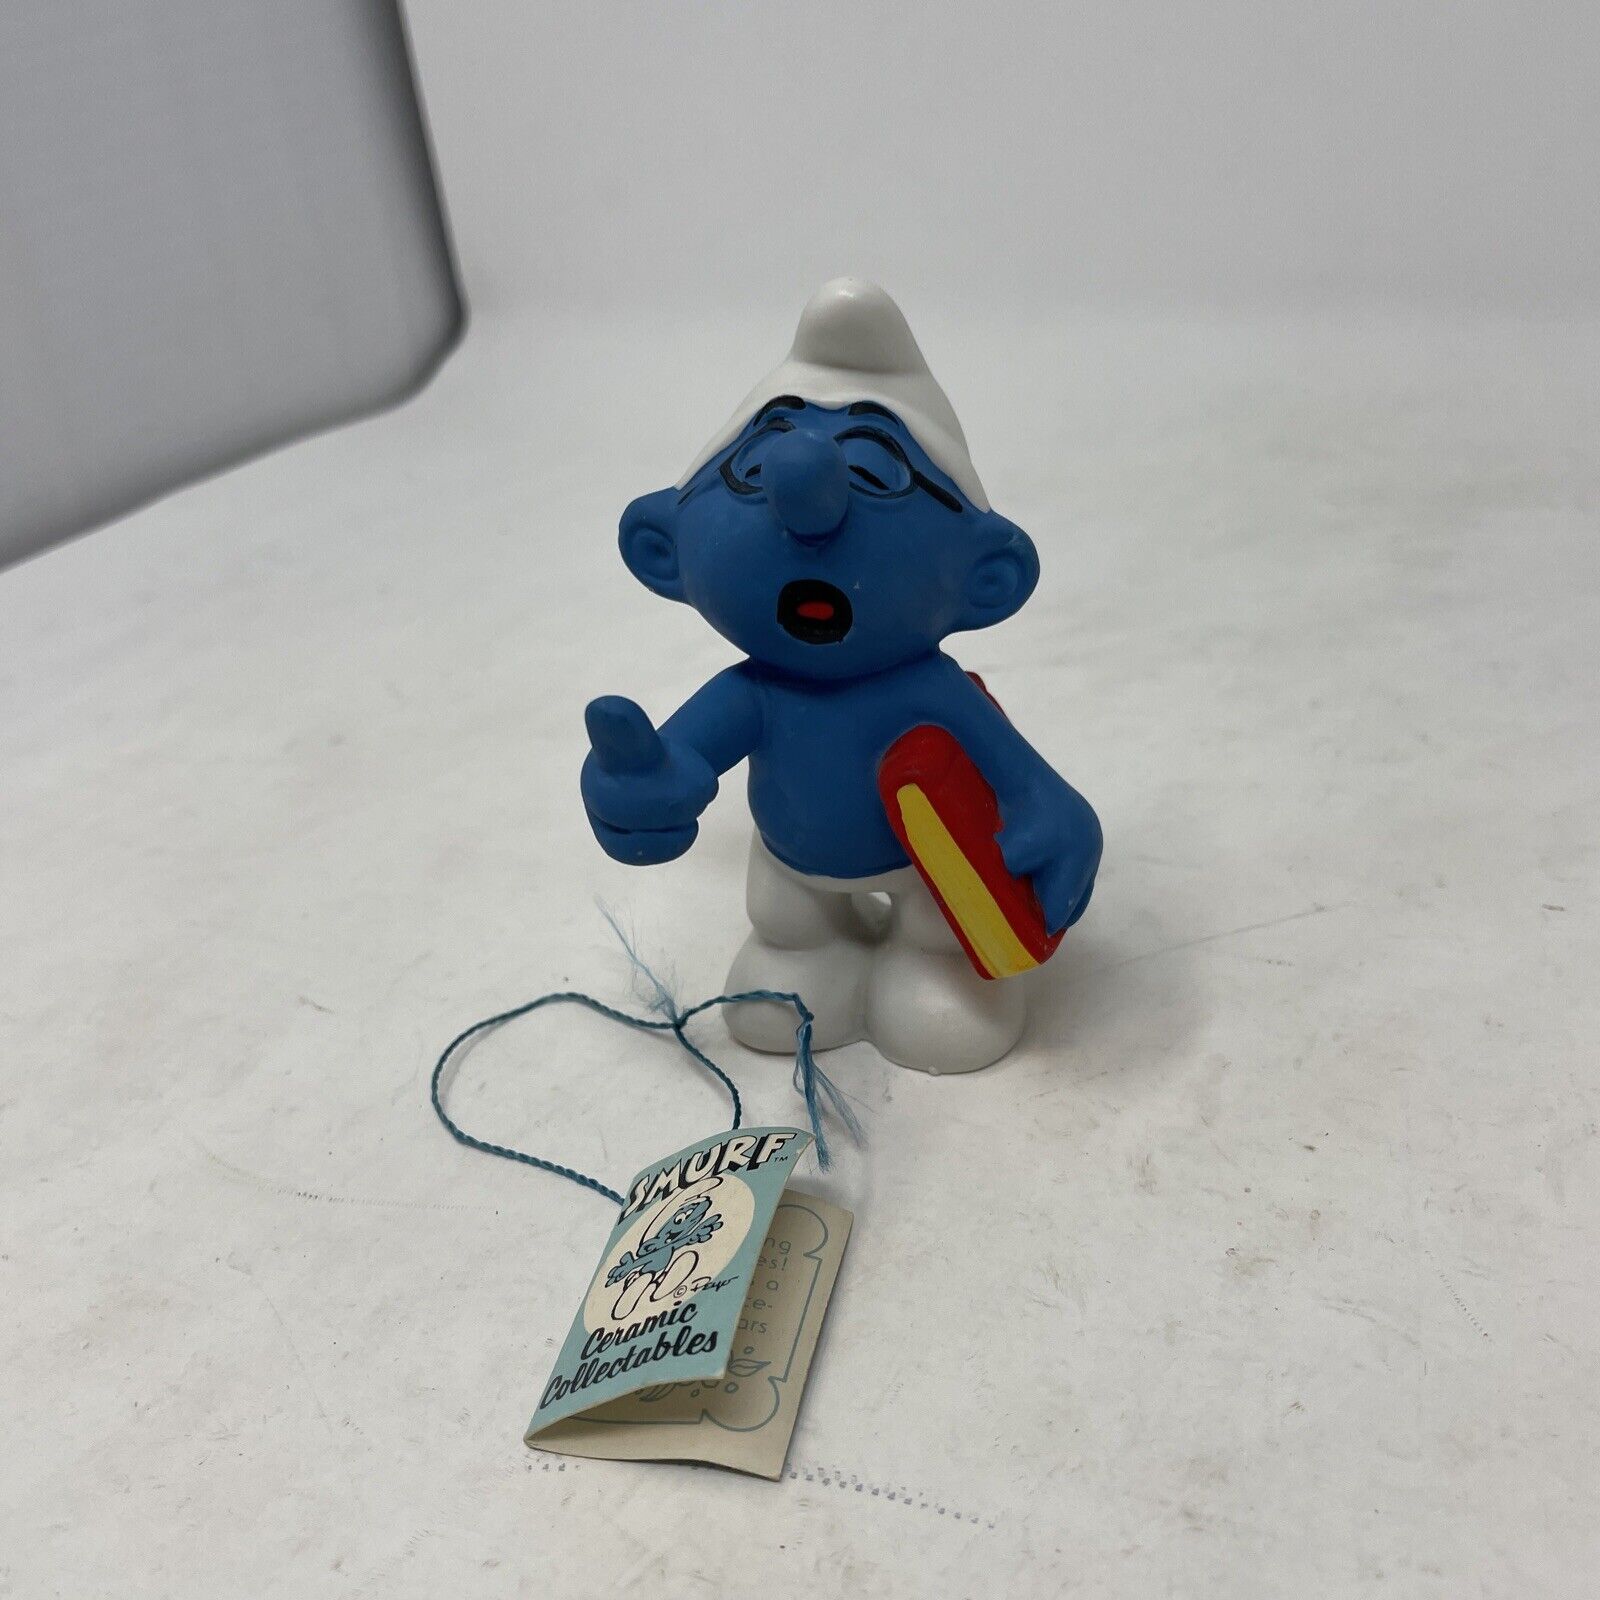 Vintage 1982 Wallace Berrie The Smurfs Ceramic Collection Brainy Smurf figurine